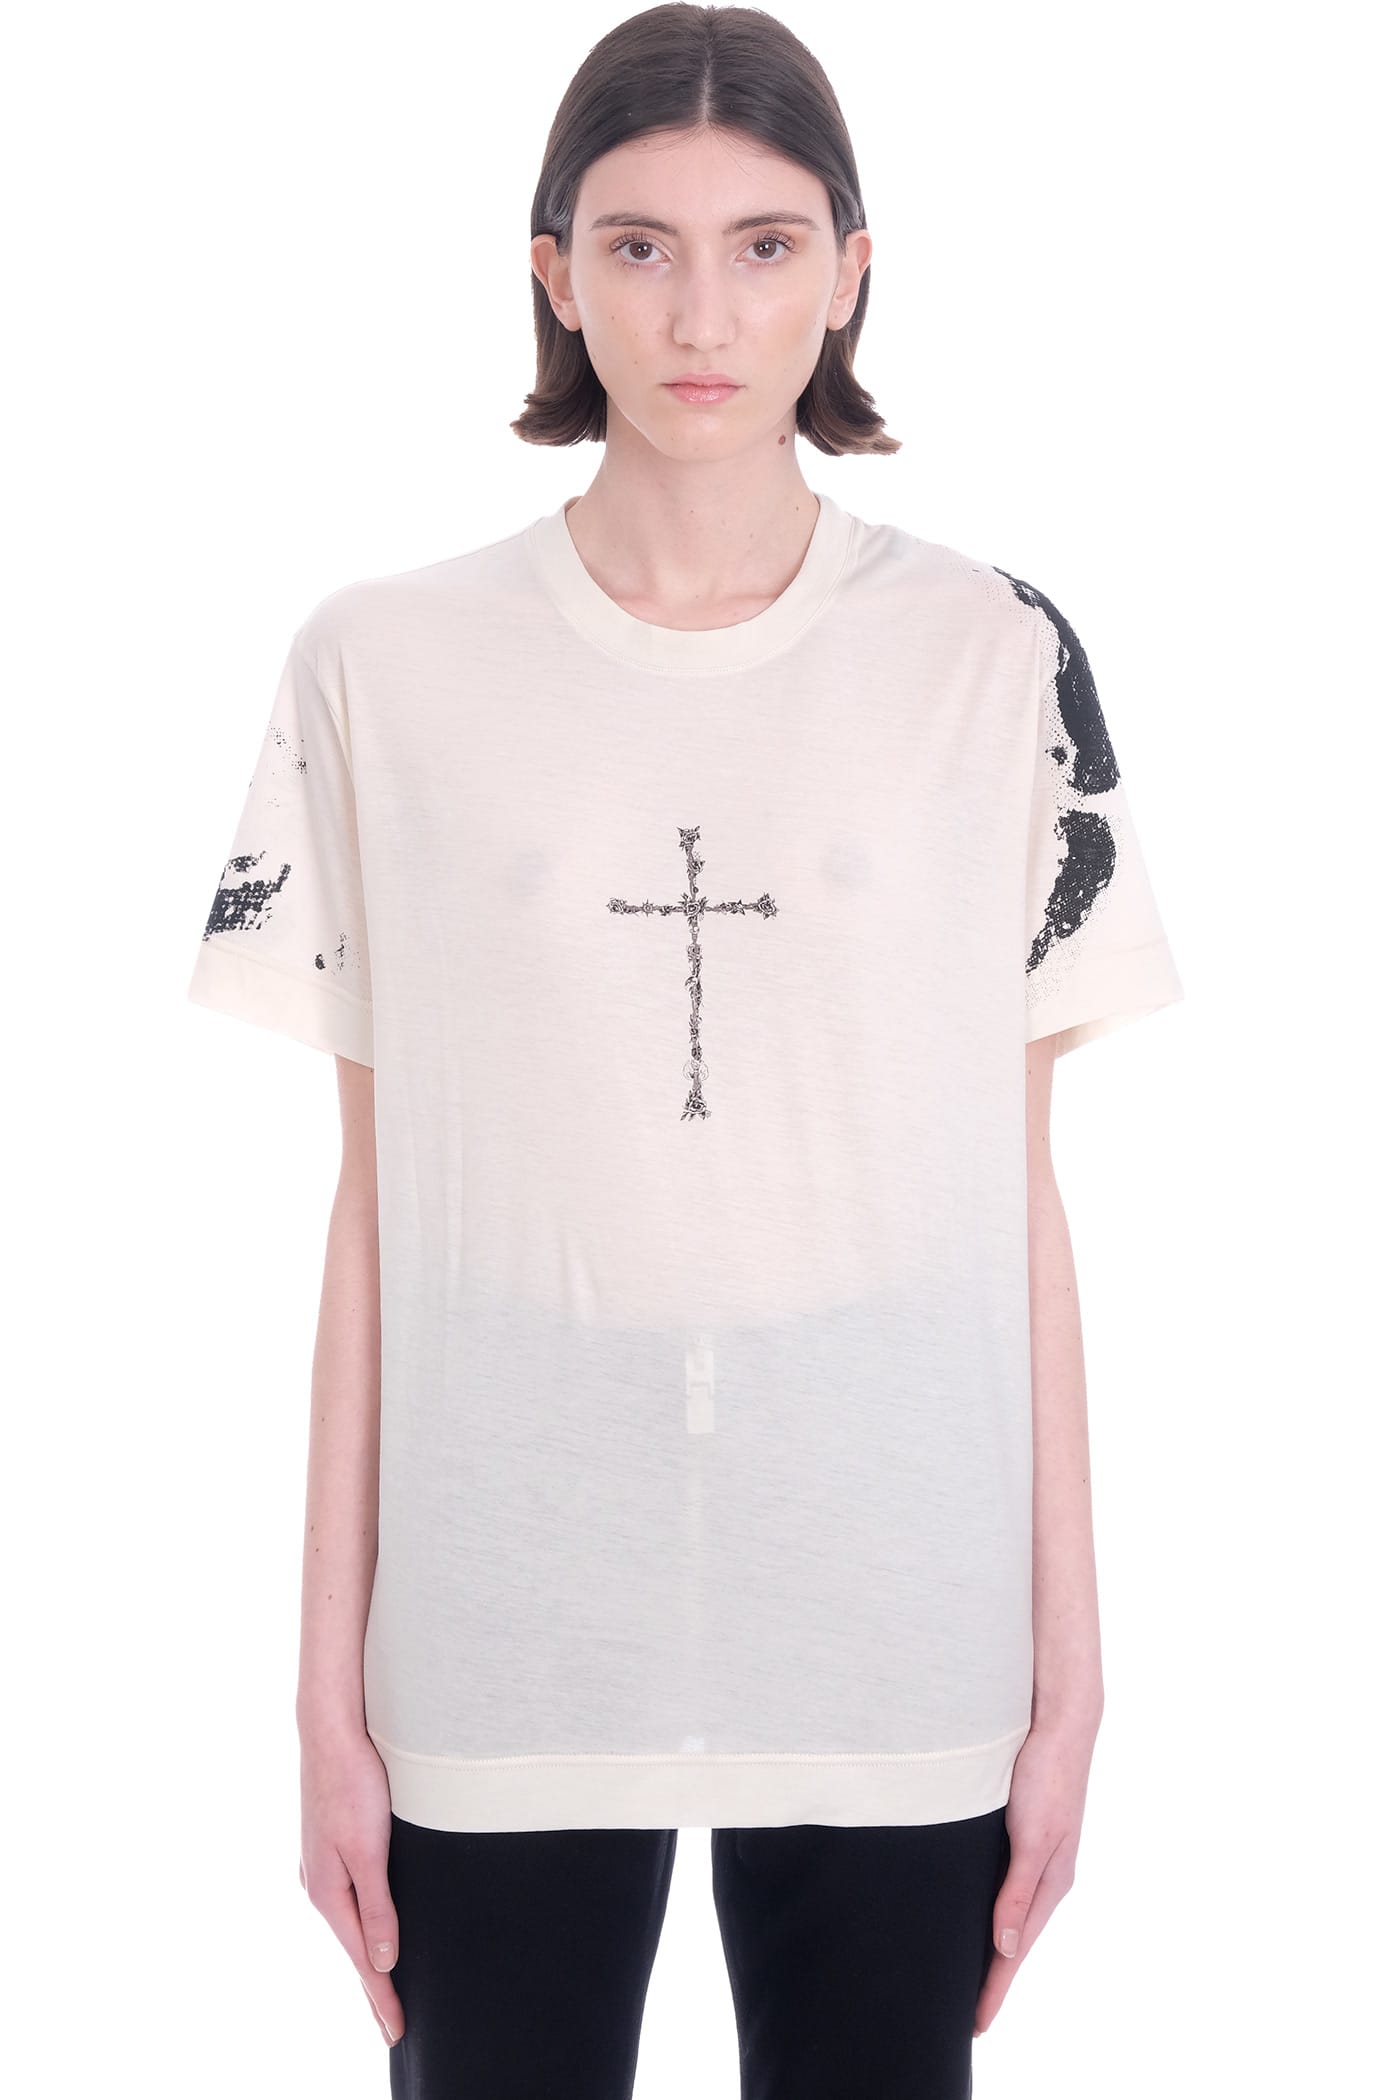 GIVENCHY T-SHIRT IN BEIGE COTTON,BW707Z3Z5P267